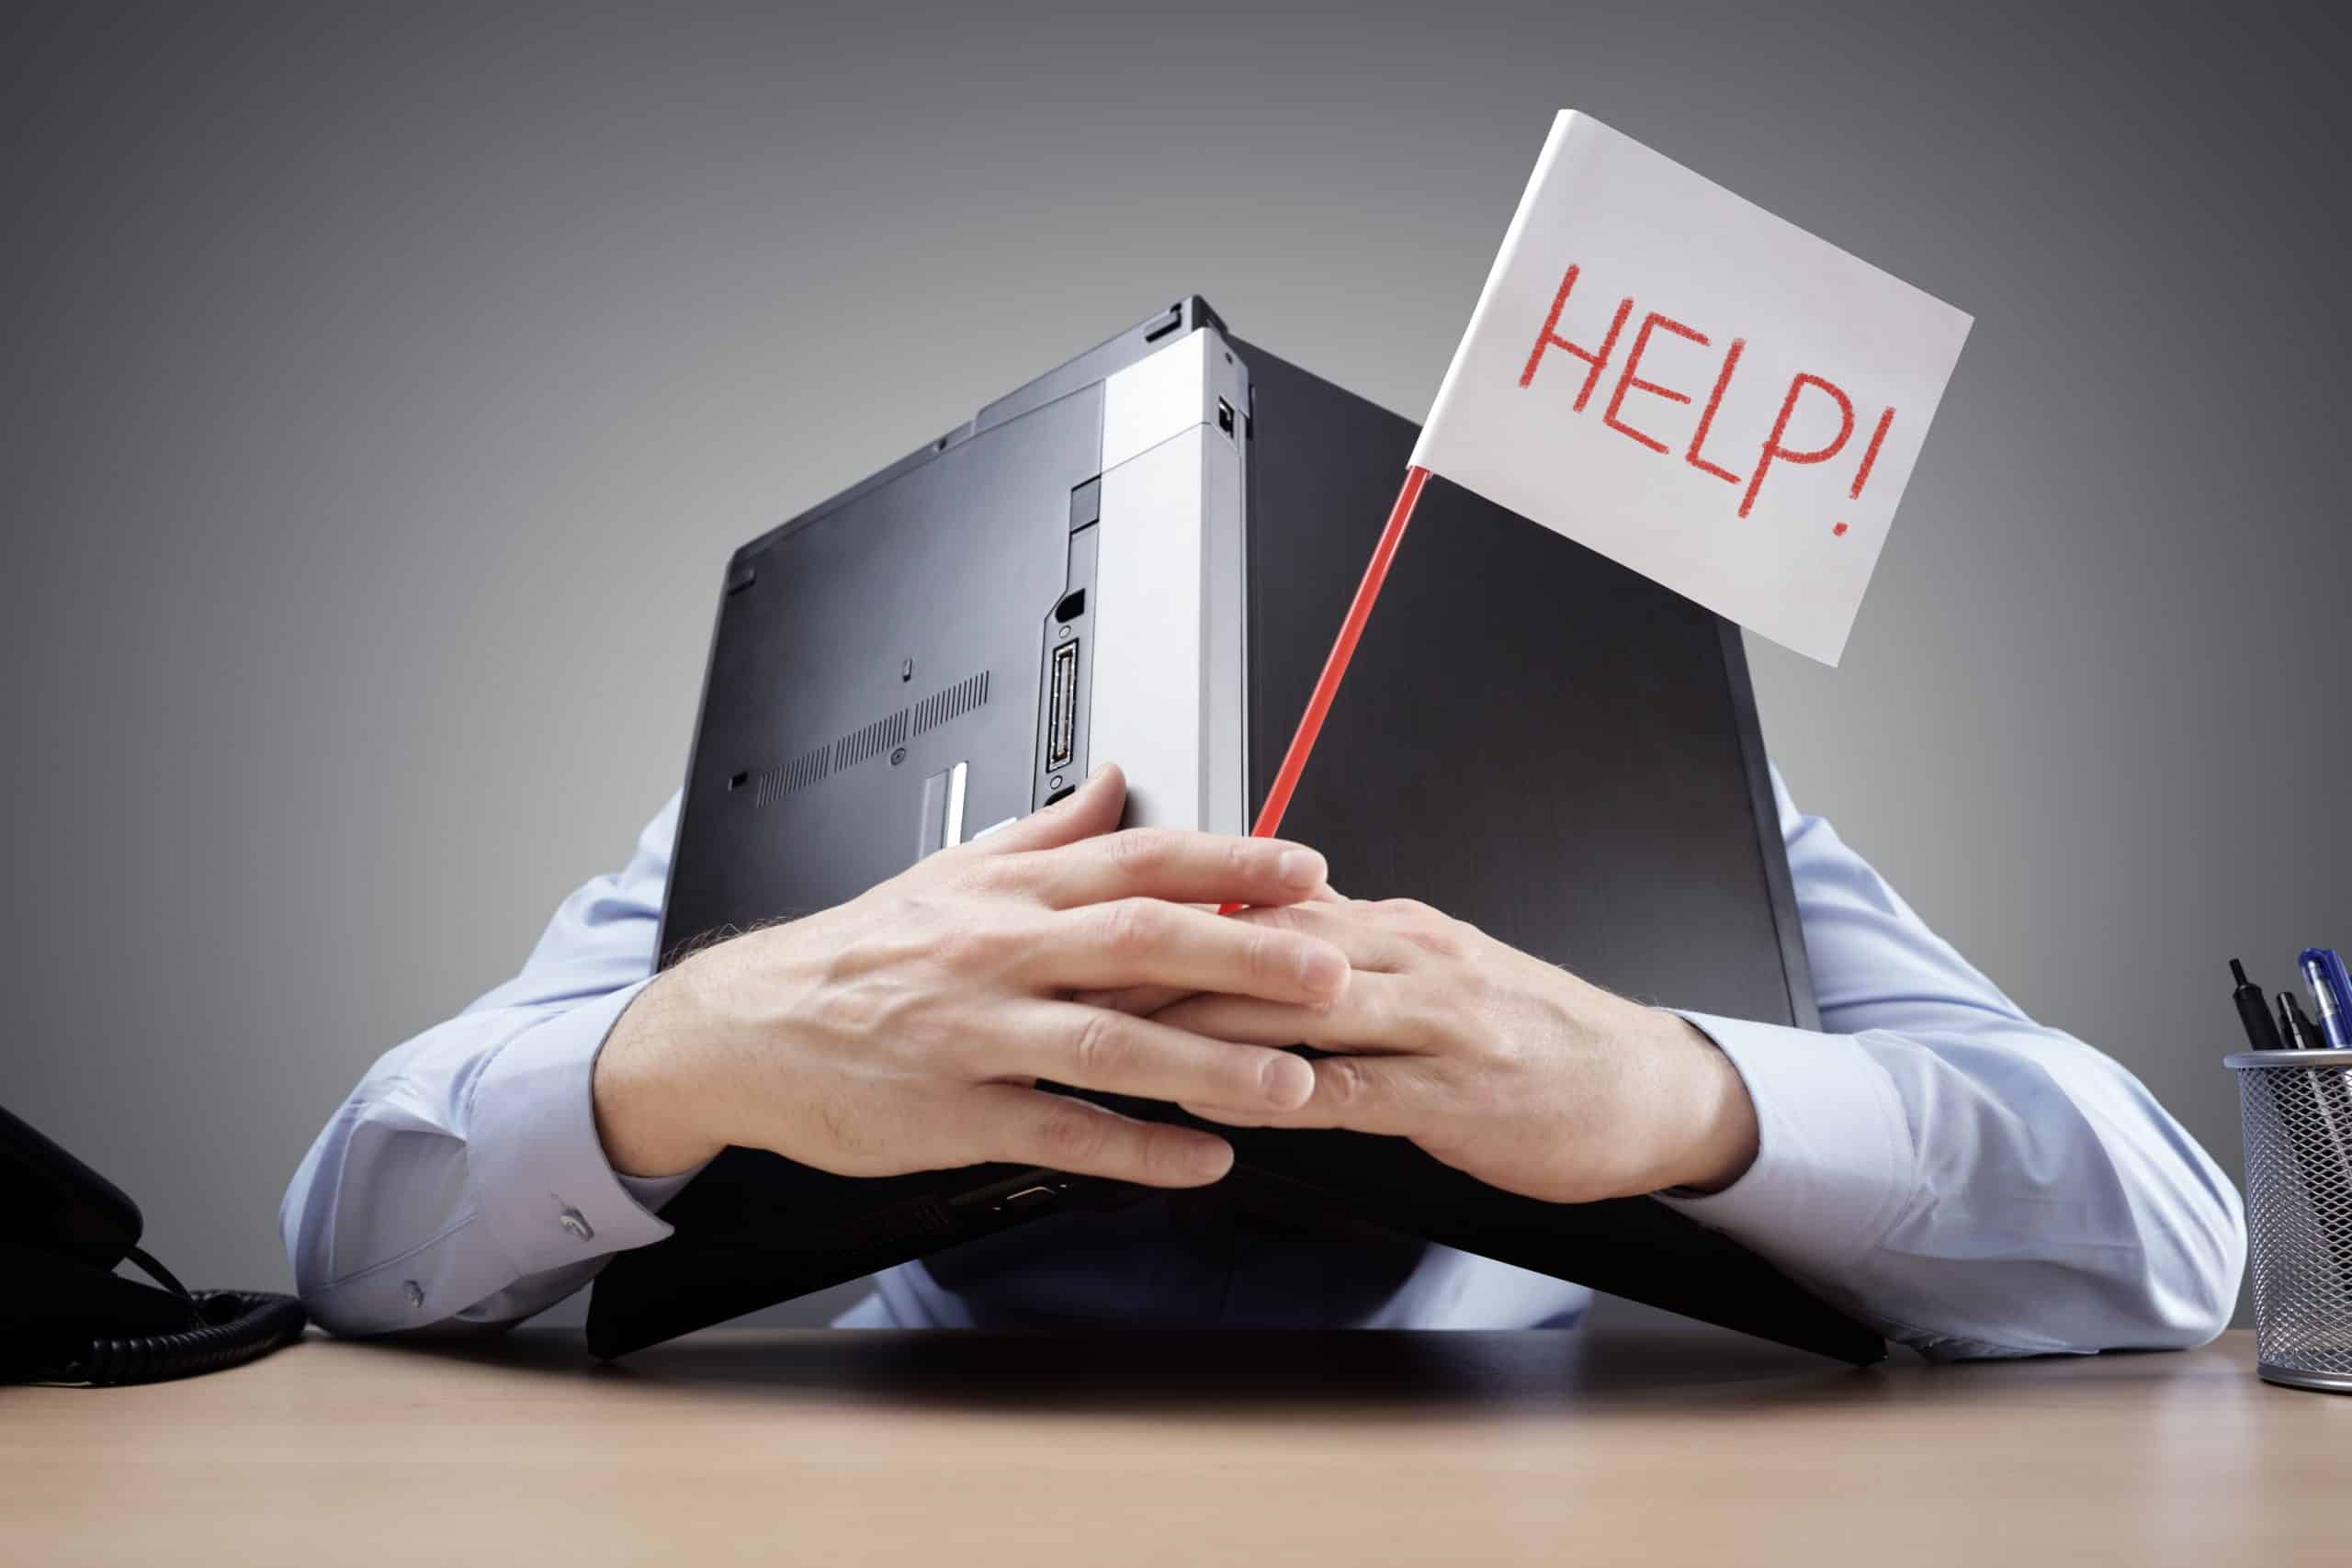 Businessman-burying-his-head-uner-a-laptop-asking-for-help